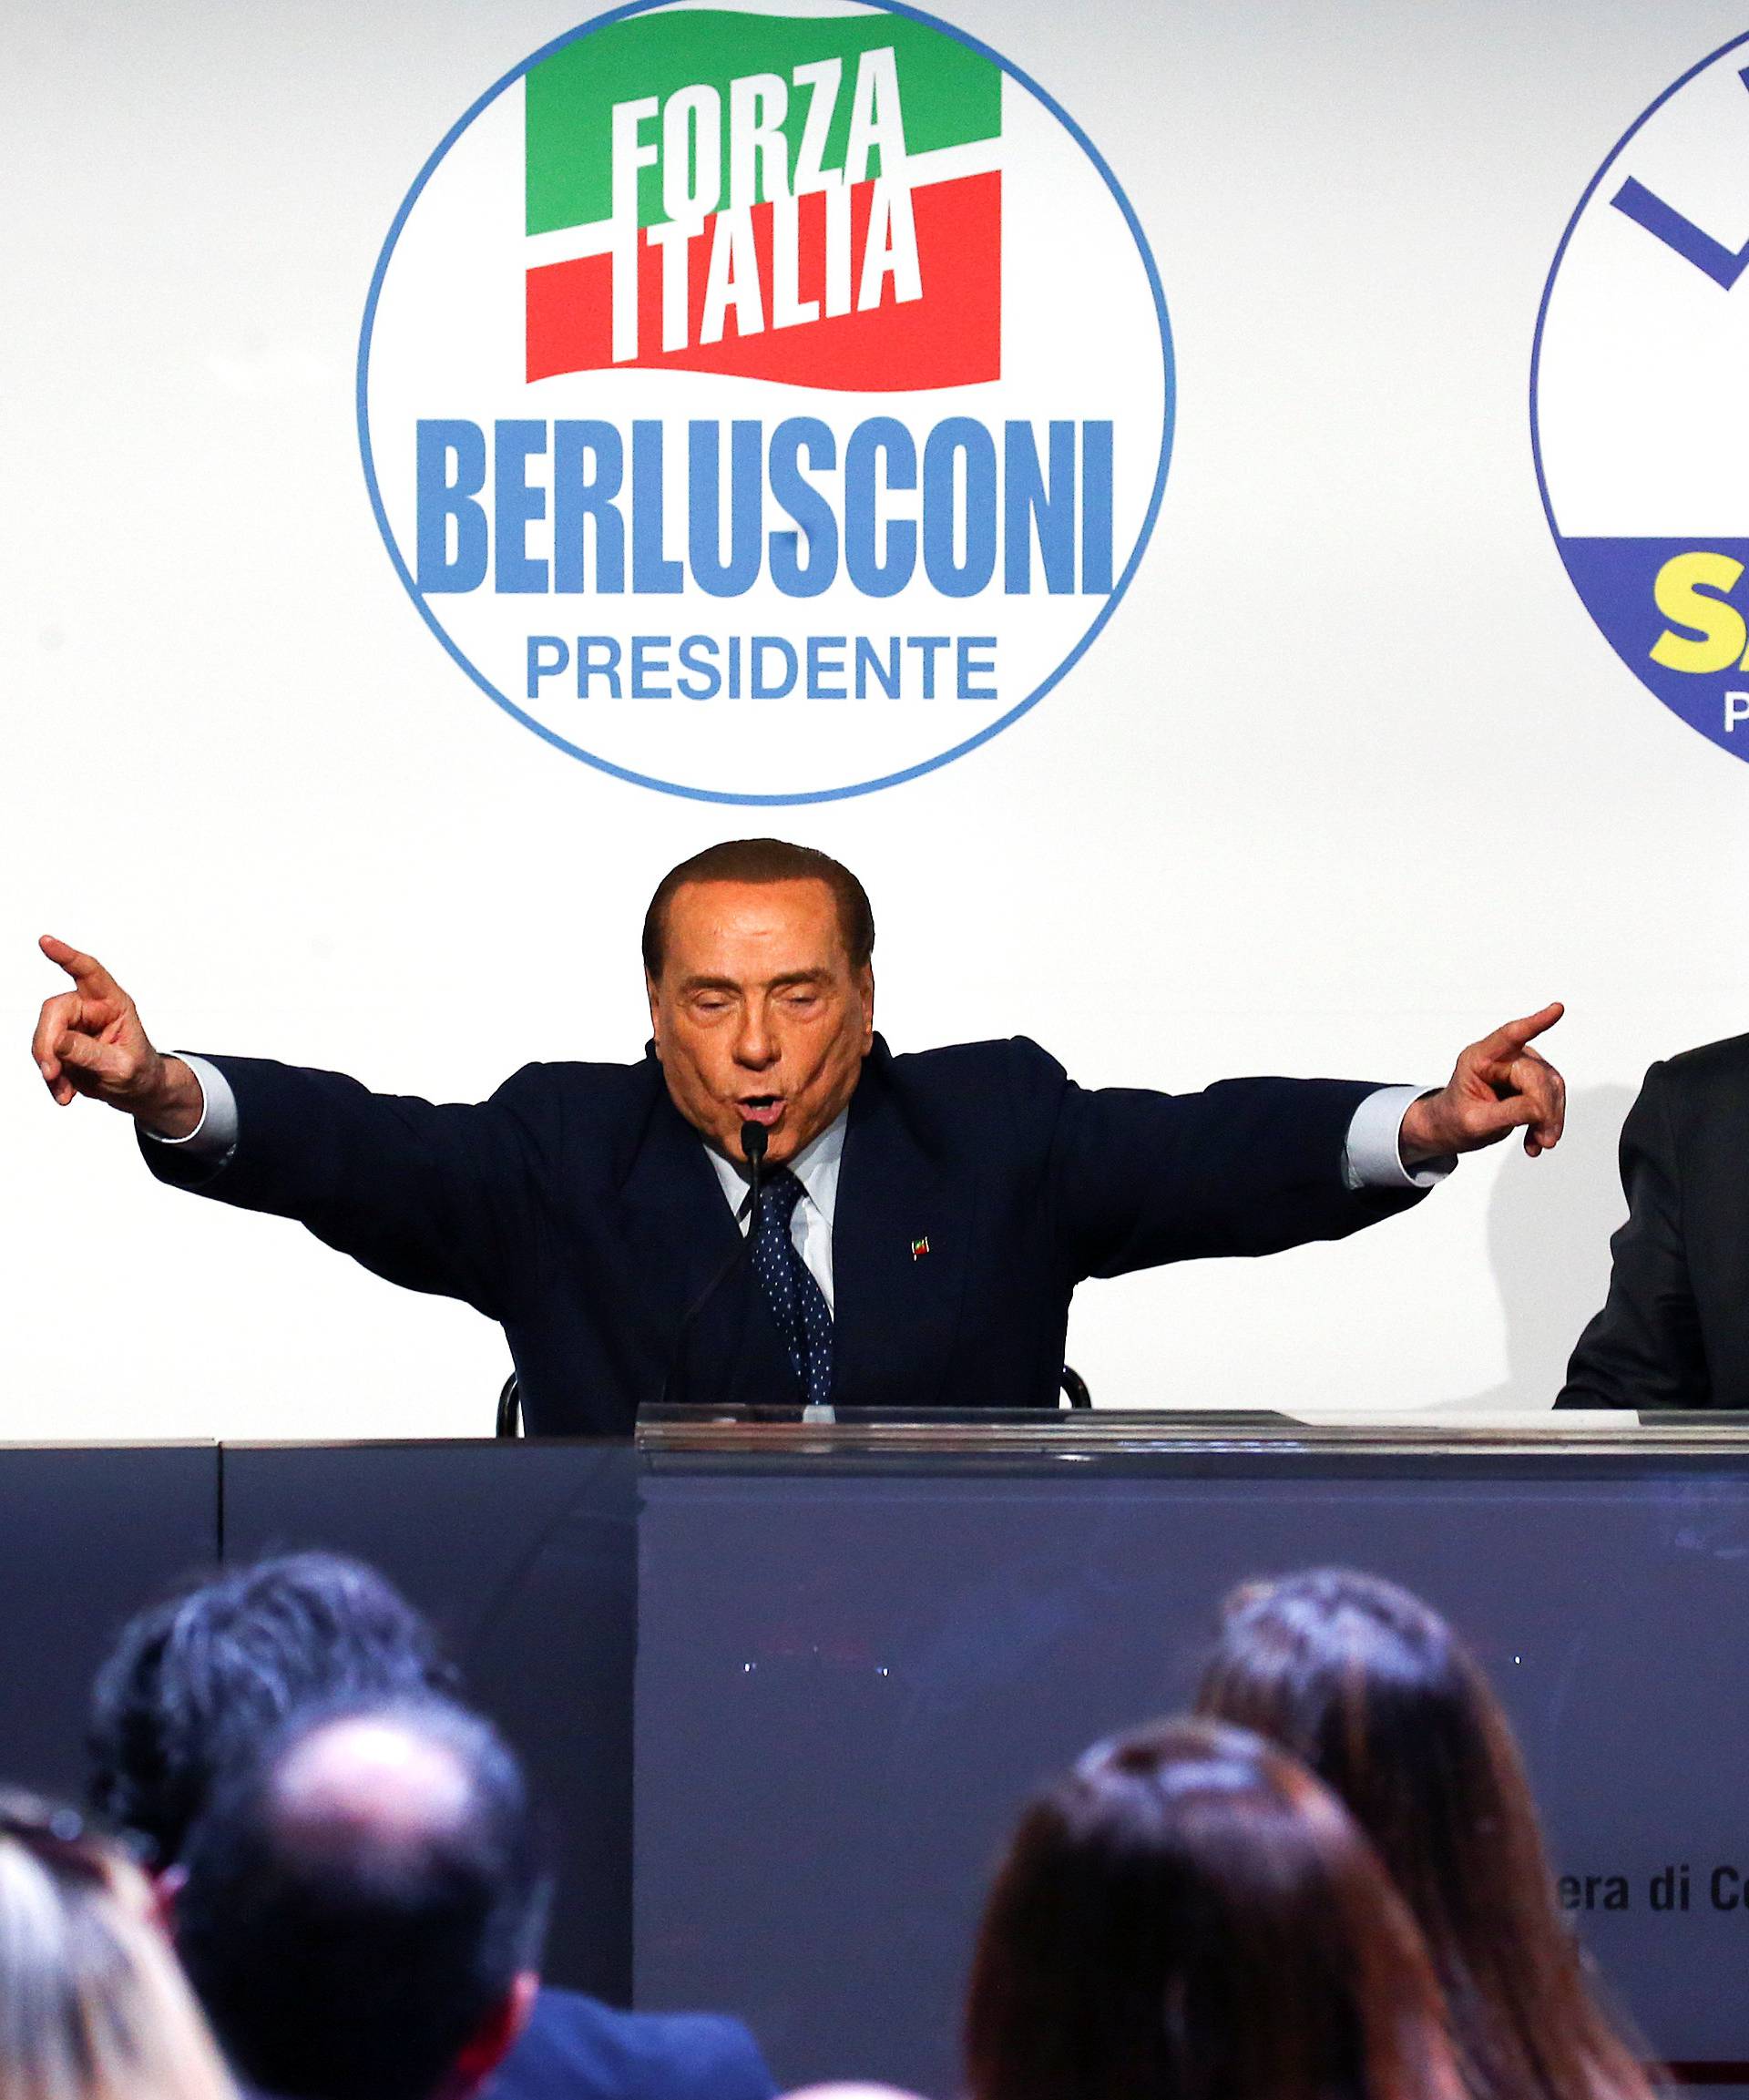 Forza Italia leader Silvio Berlusconi speaks flanked by Fratelli D'Italia party leader Giorgia Meloni and Northern League leader Matteo Salvini during a meeting in Rome